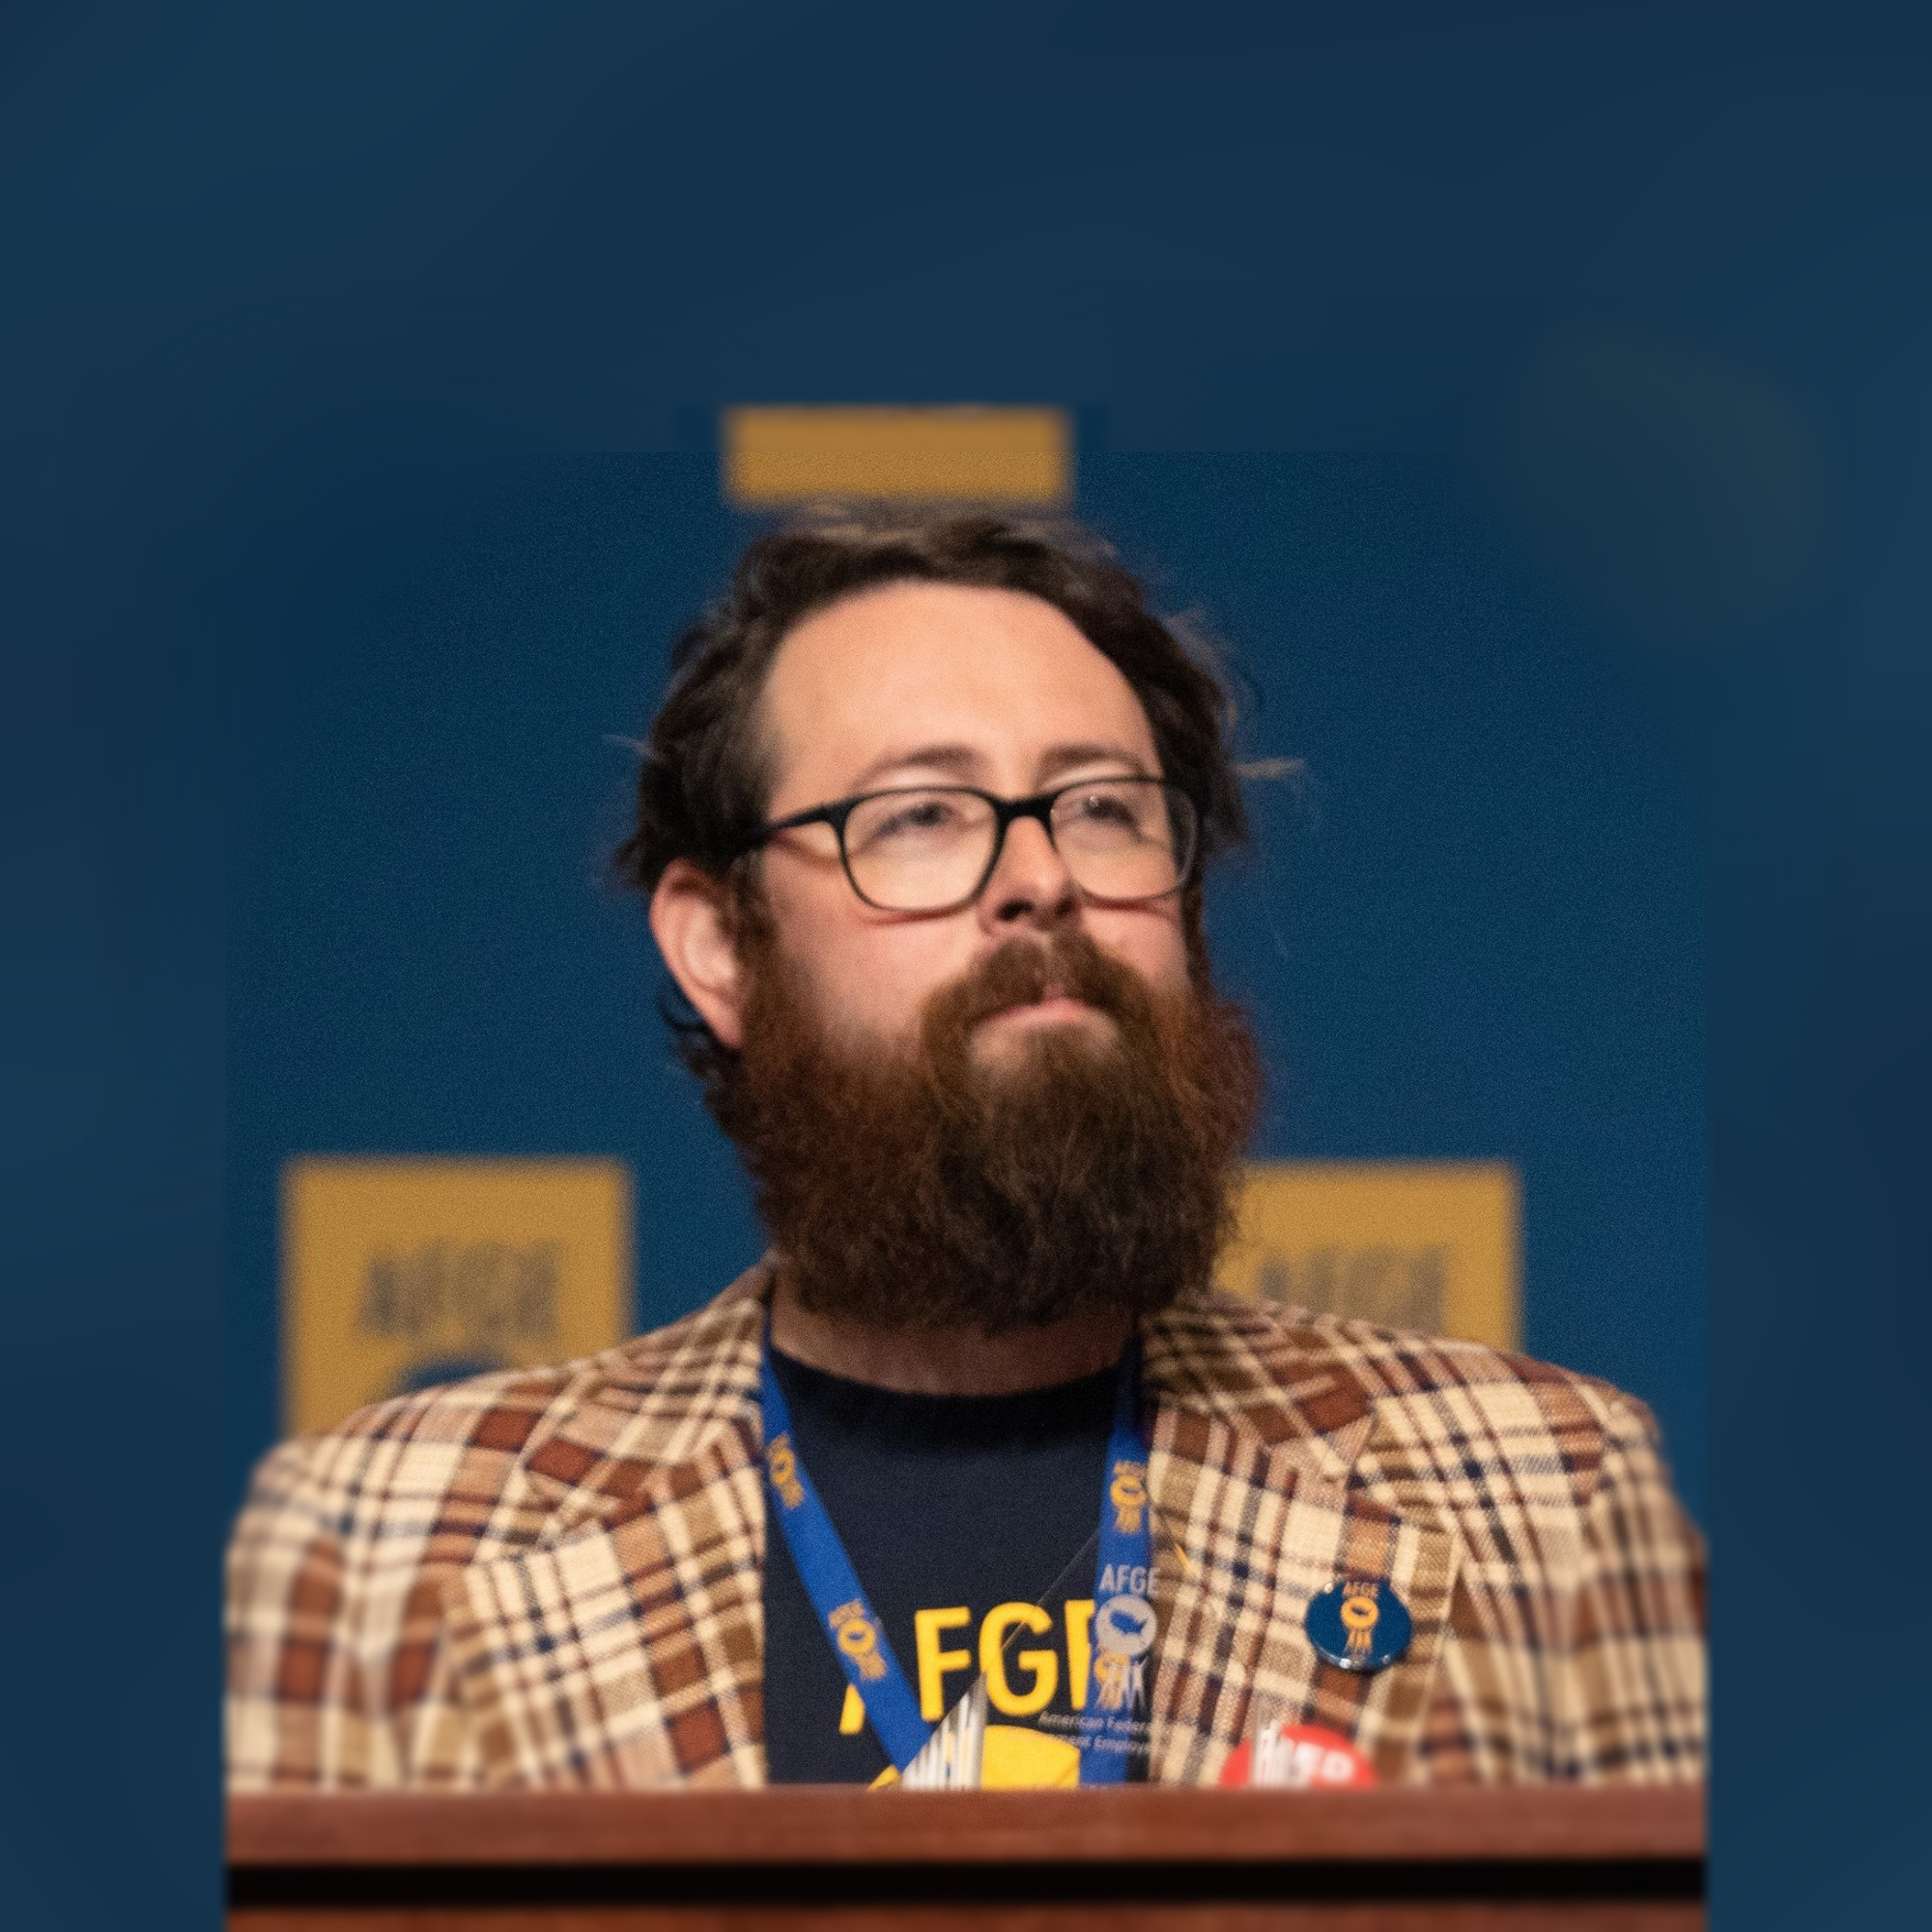 Photo of Matt Muchowski standing at a podium with a blue background